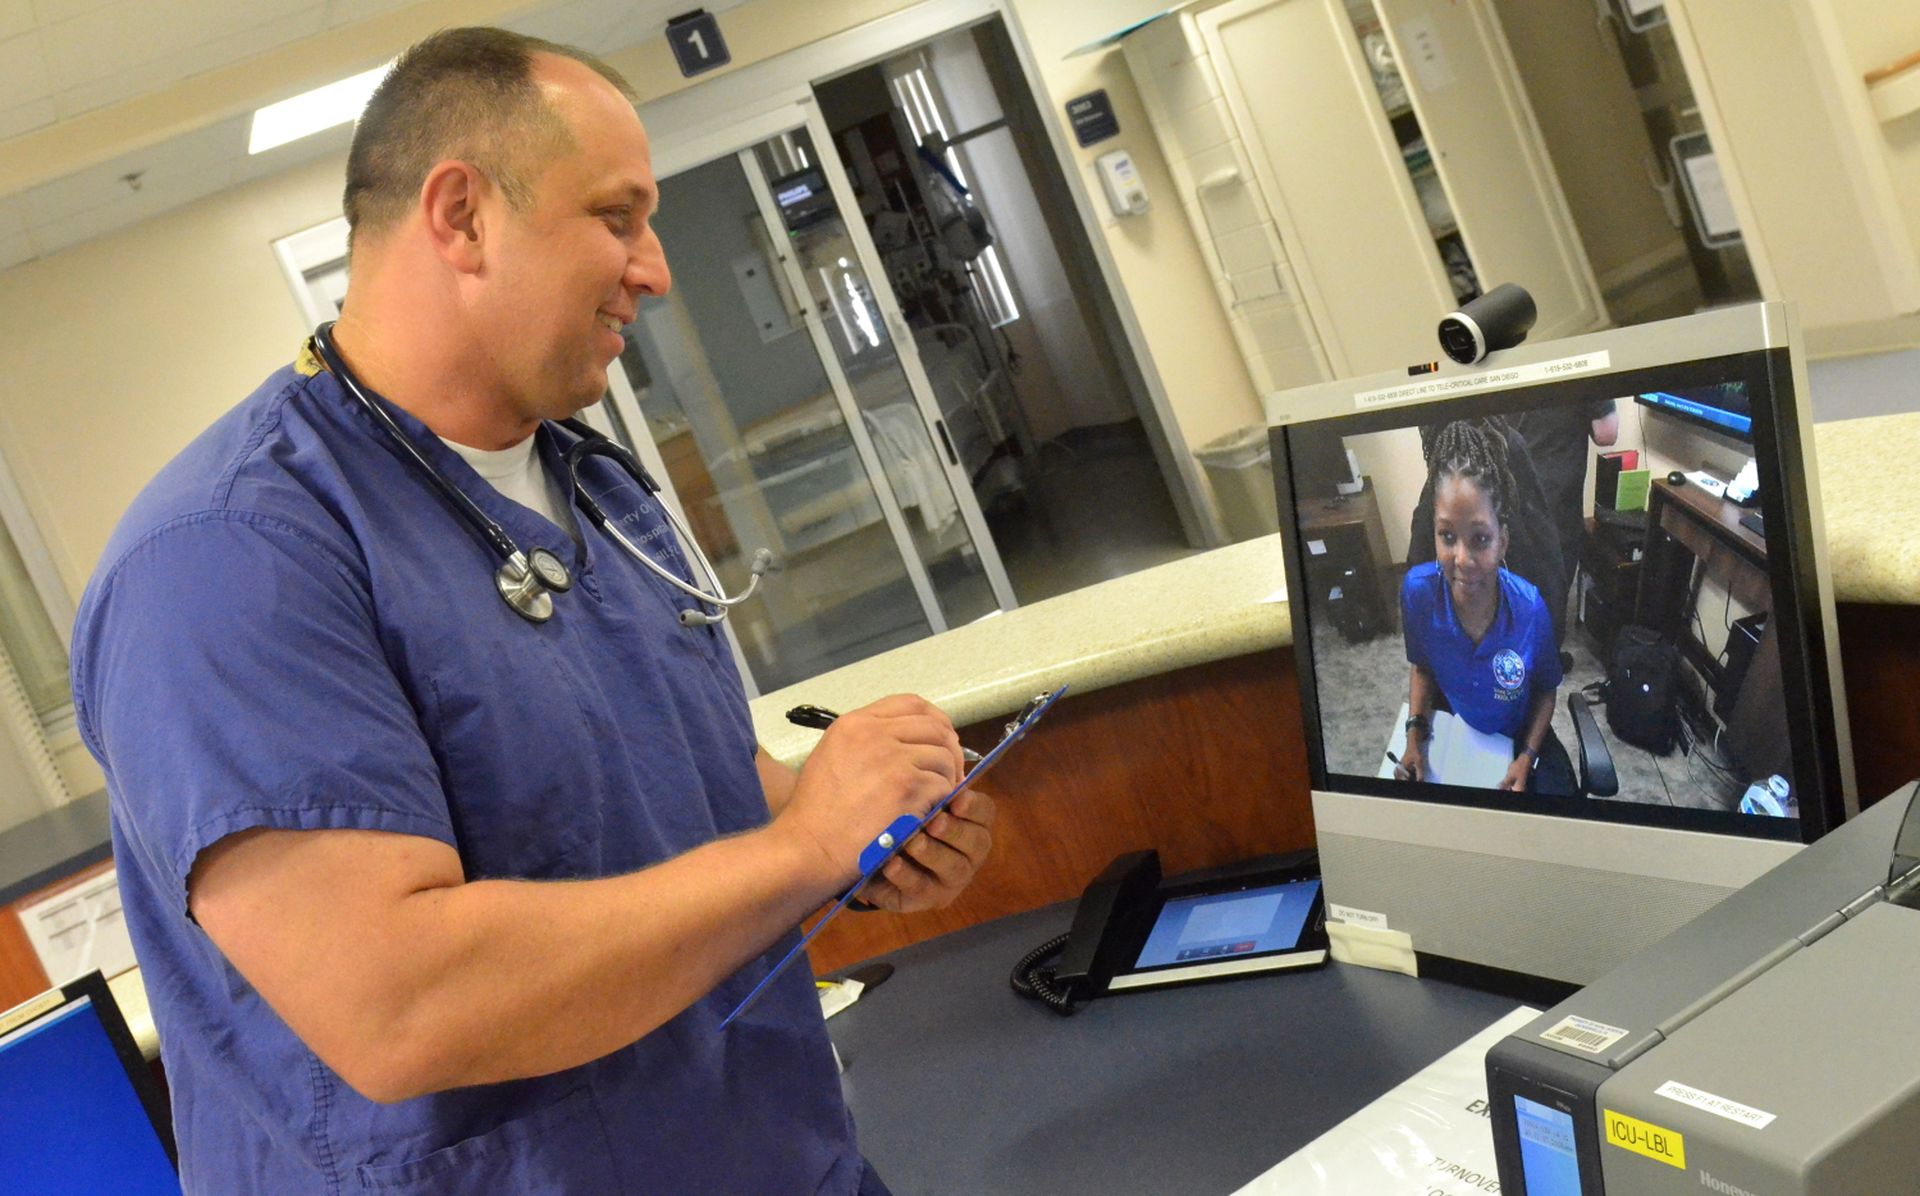 Lt. Michael White, a nurse at Naval Hospital Jacksonville’s intensive care unit, uses telehealth to discuss patient statuses and recommendations with Tiffany Ingram, a nurse at Naval Medical Center San Diego, on June 5, 2019. (Jacob Sippel/Navy)